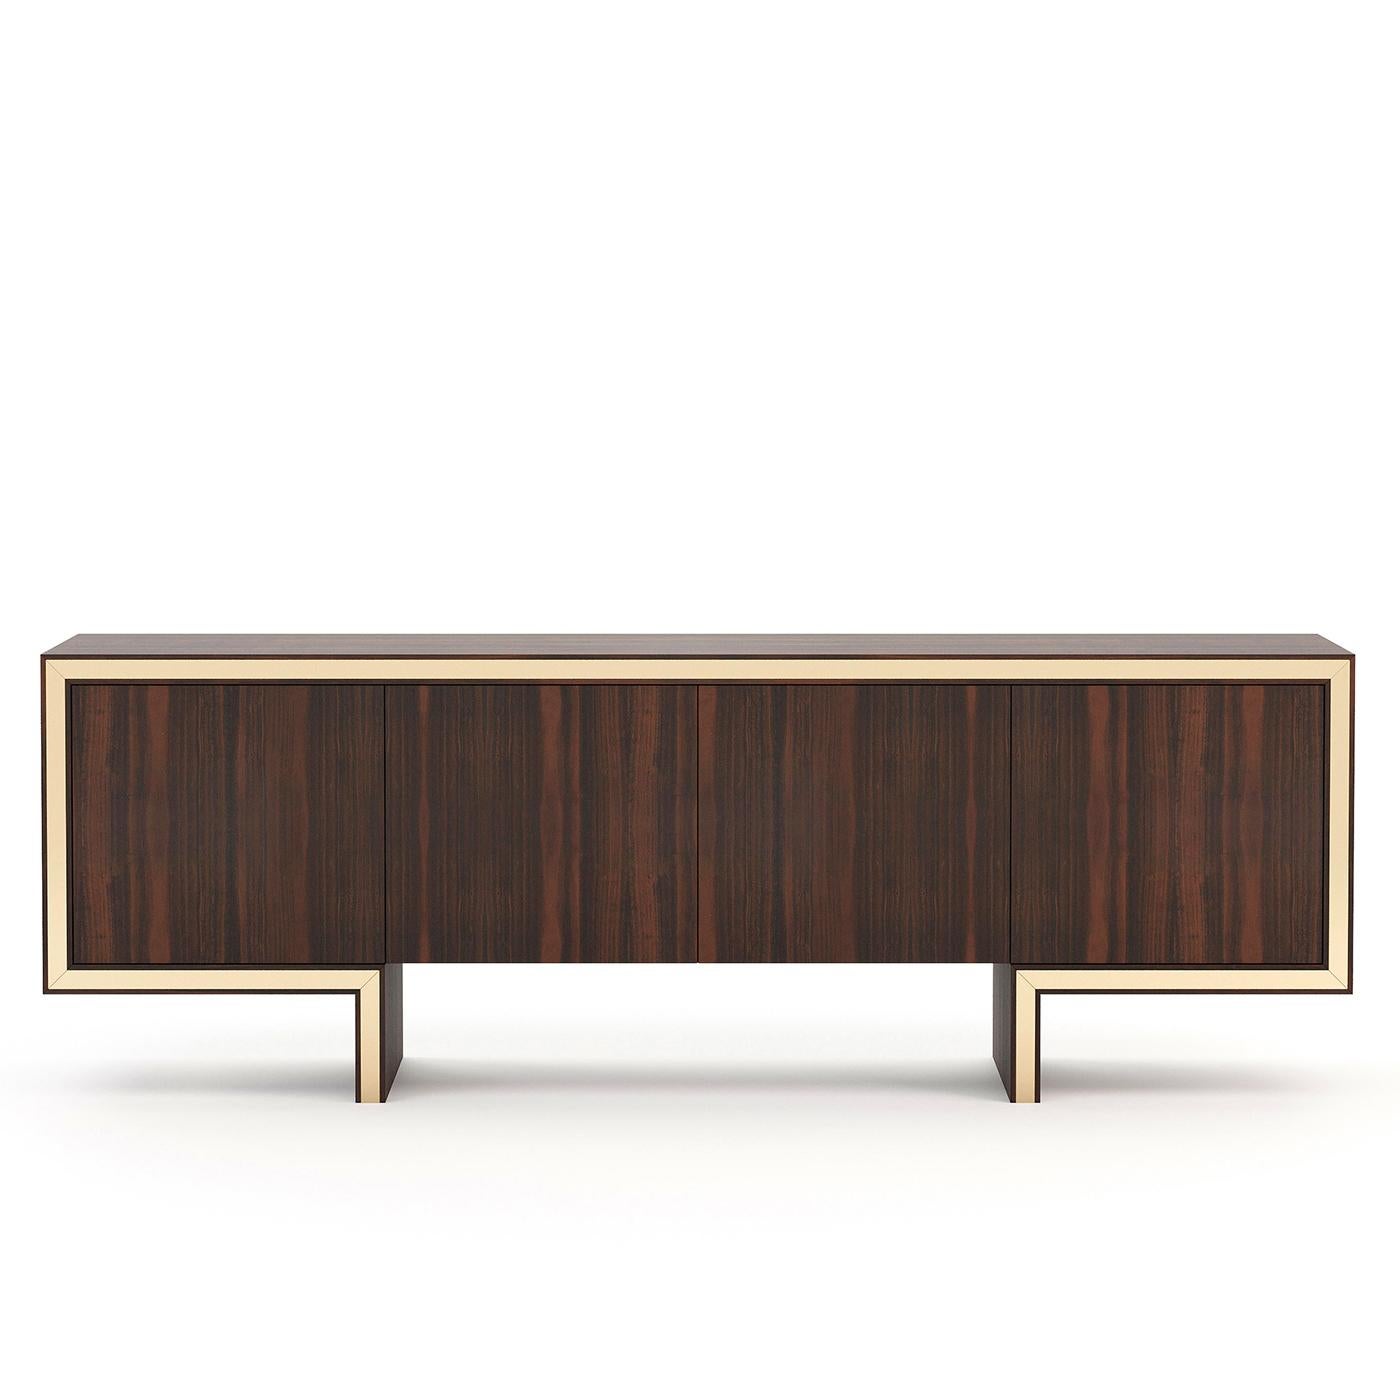 Sideboard Andora with structure in eucalyptus wood
veneer in matte finish, with 4 doors and with 1 shelf on 
each part. With polished stainless steel trim in gold finish.
Measures: L 200 x D 50 x H 83cm, price: 7800,00€.
Also available in ebony